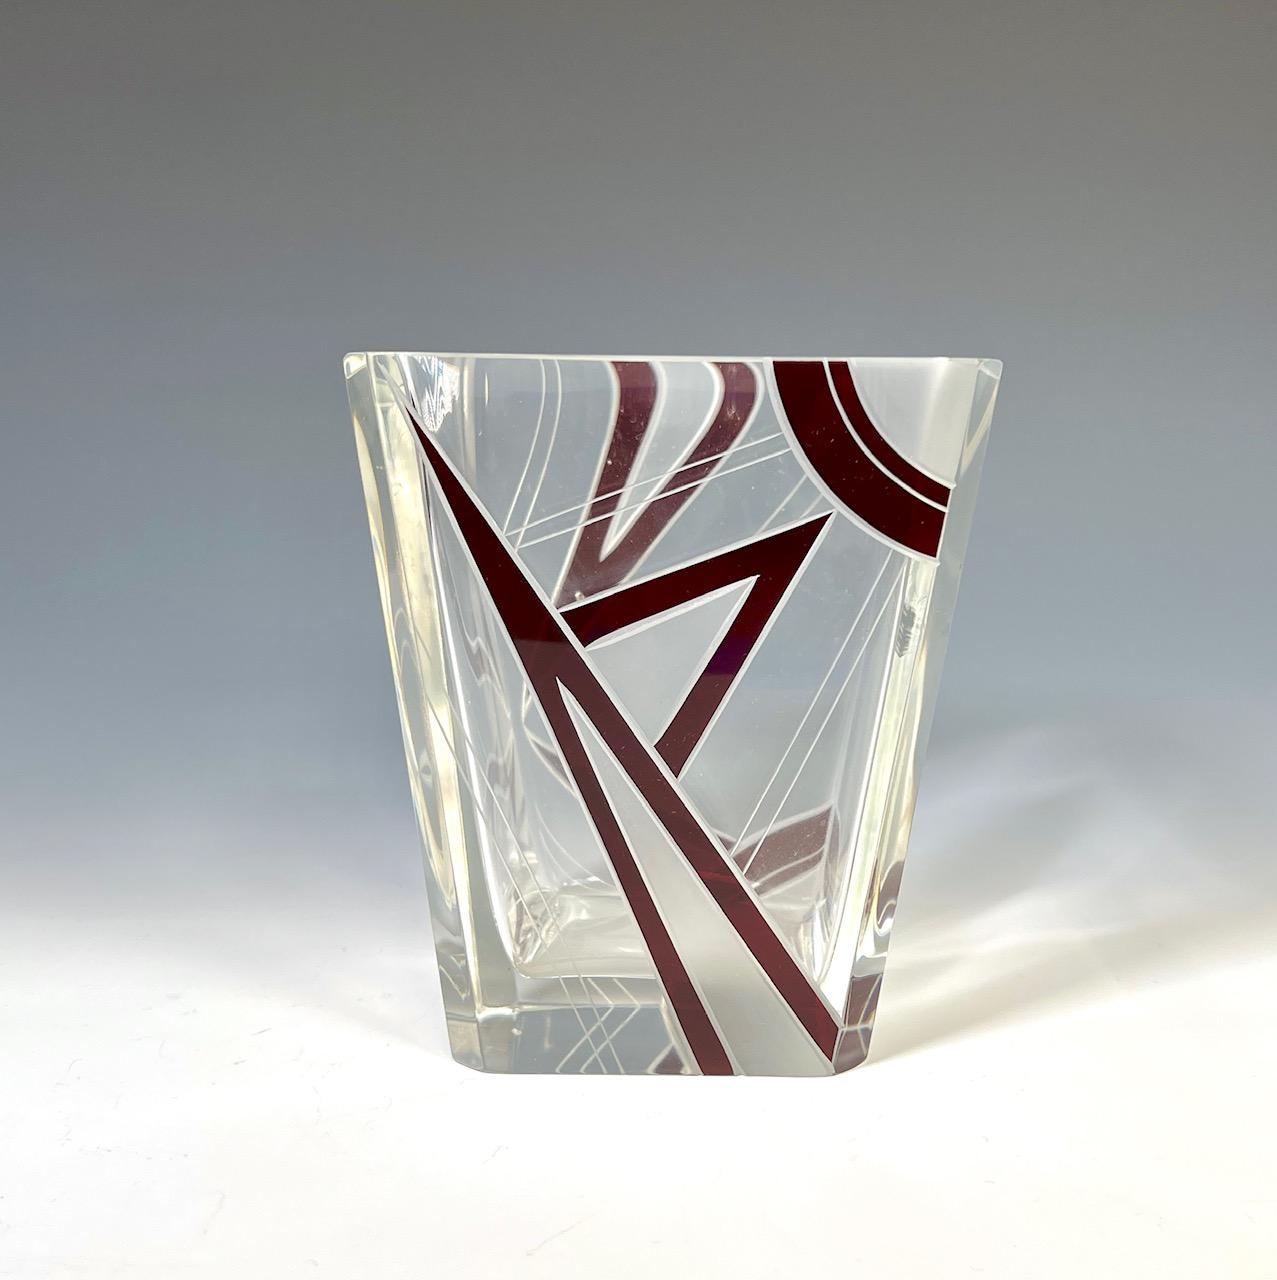 Czech Palda Art Deco Rectangular Vase with Red Enamel and Engraved Decoration For Sale